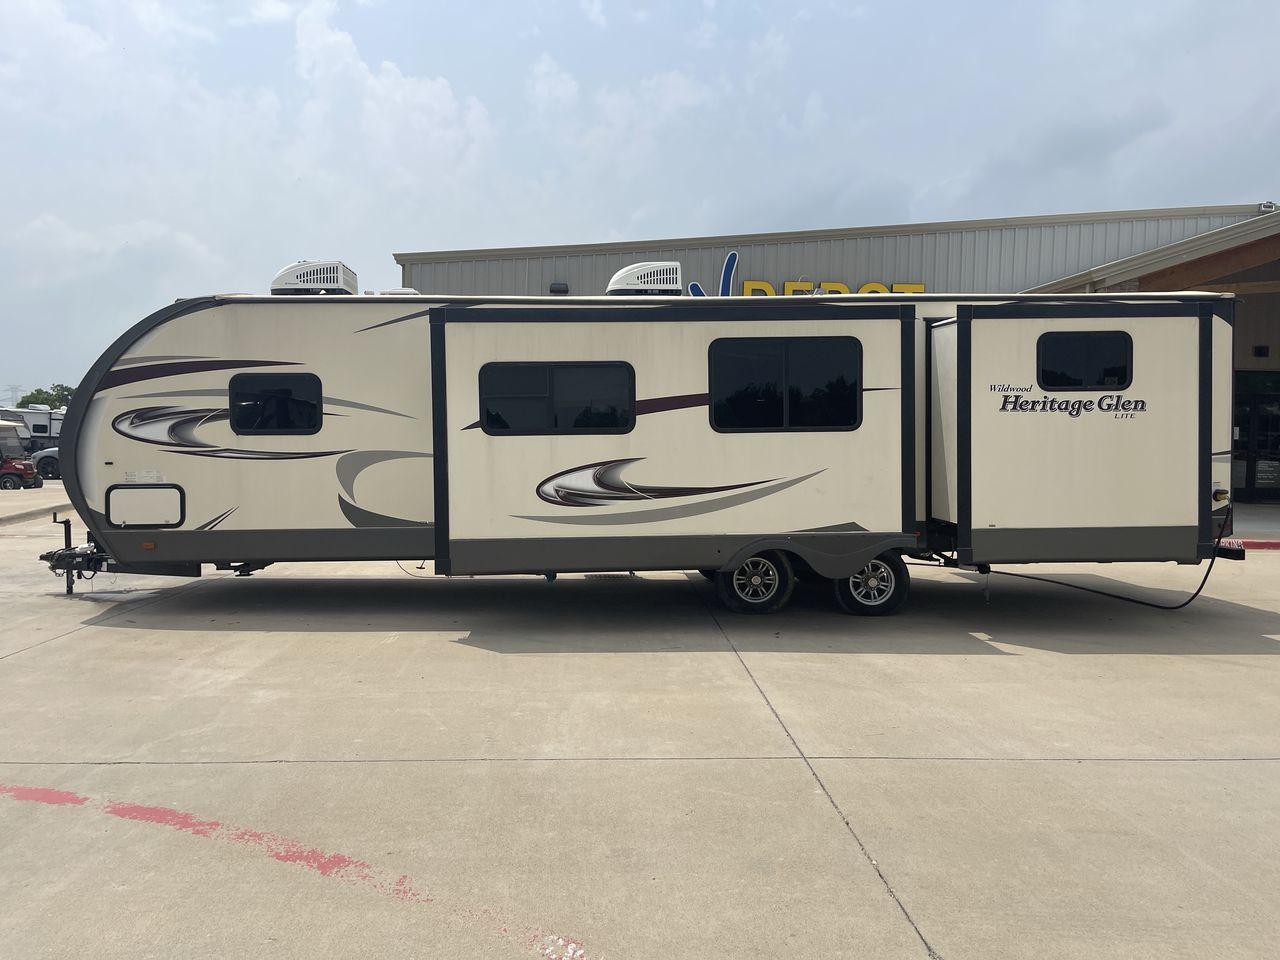 2017 TAN WILDWOOD HERITAGE GLEN 300BH (4X4TWBF29HU) , Length: 37.42 ft. | Dry Weight: 8,439 lbs. | Slides: 3 transmission, located at 4319 N Main Street, Cleburne, TX, 76033, (817) 221-0660, 32.435829, -97.384178 - The 2017 Wildwood Heritage Glen 300BH has roomy and comfortable rooms for your outdoor activities. This travel trailer offers ample space for the entire family, measuring 37.42 feet in length and weighing 8,439 pounds when dry. This trailer is designed with three slides, providing ample interior spa - Photo #24